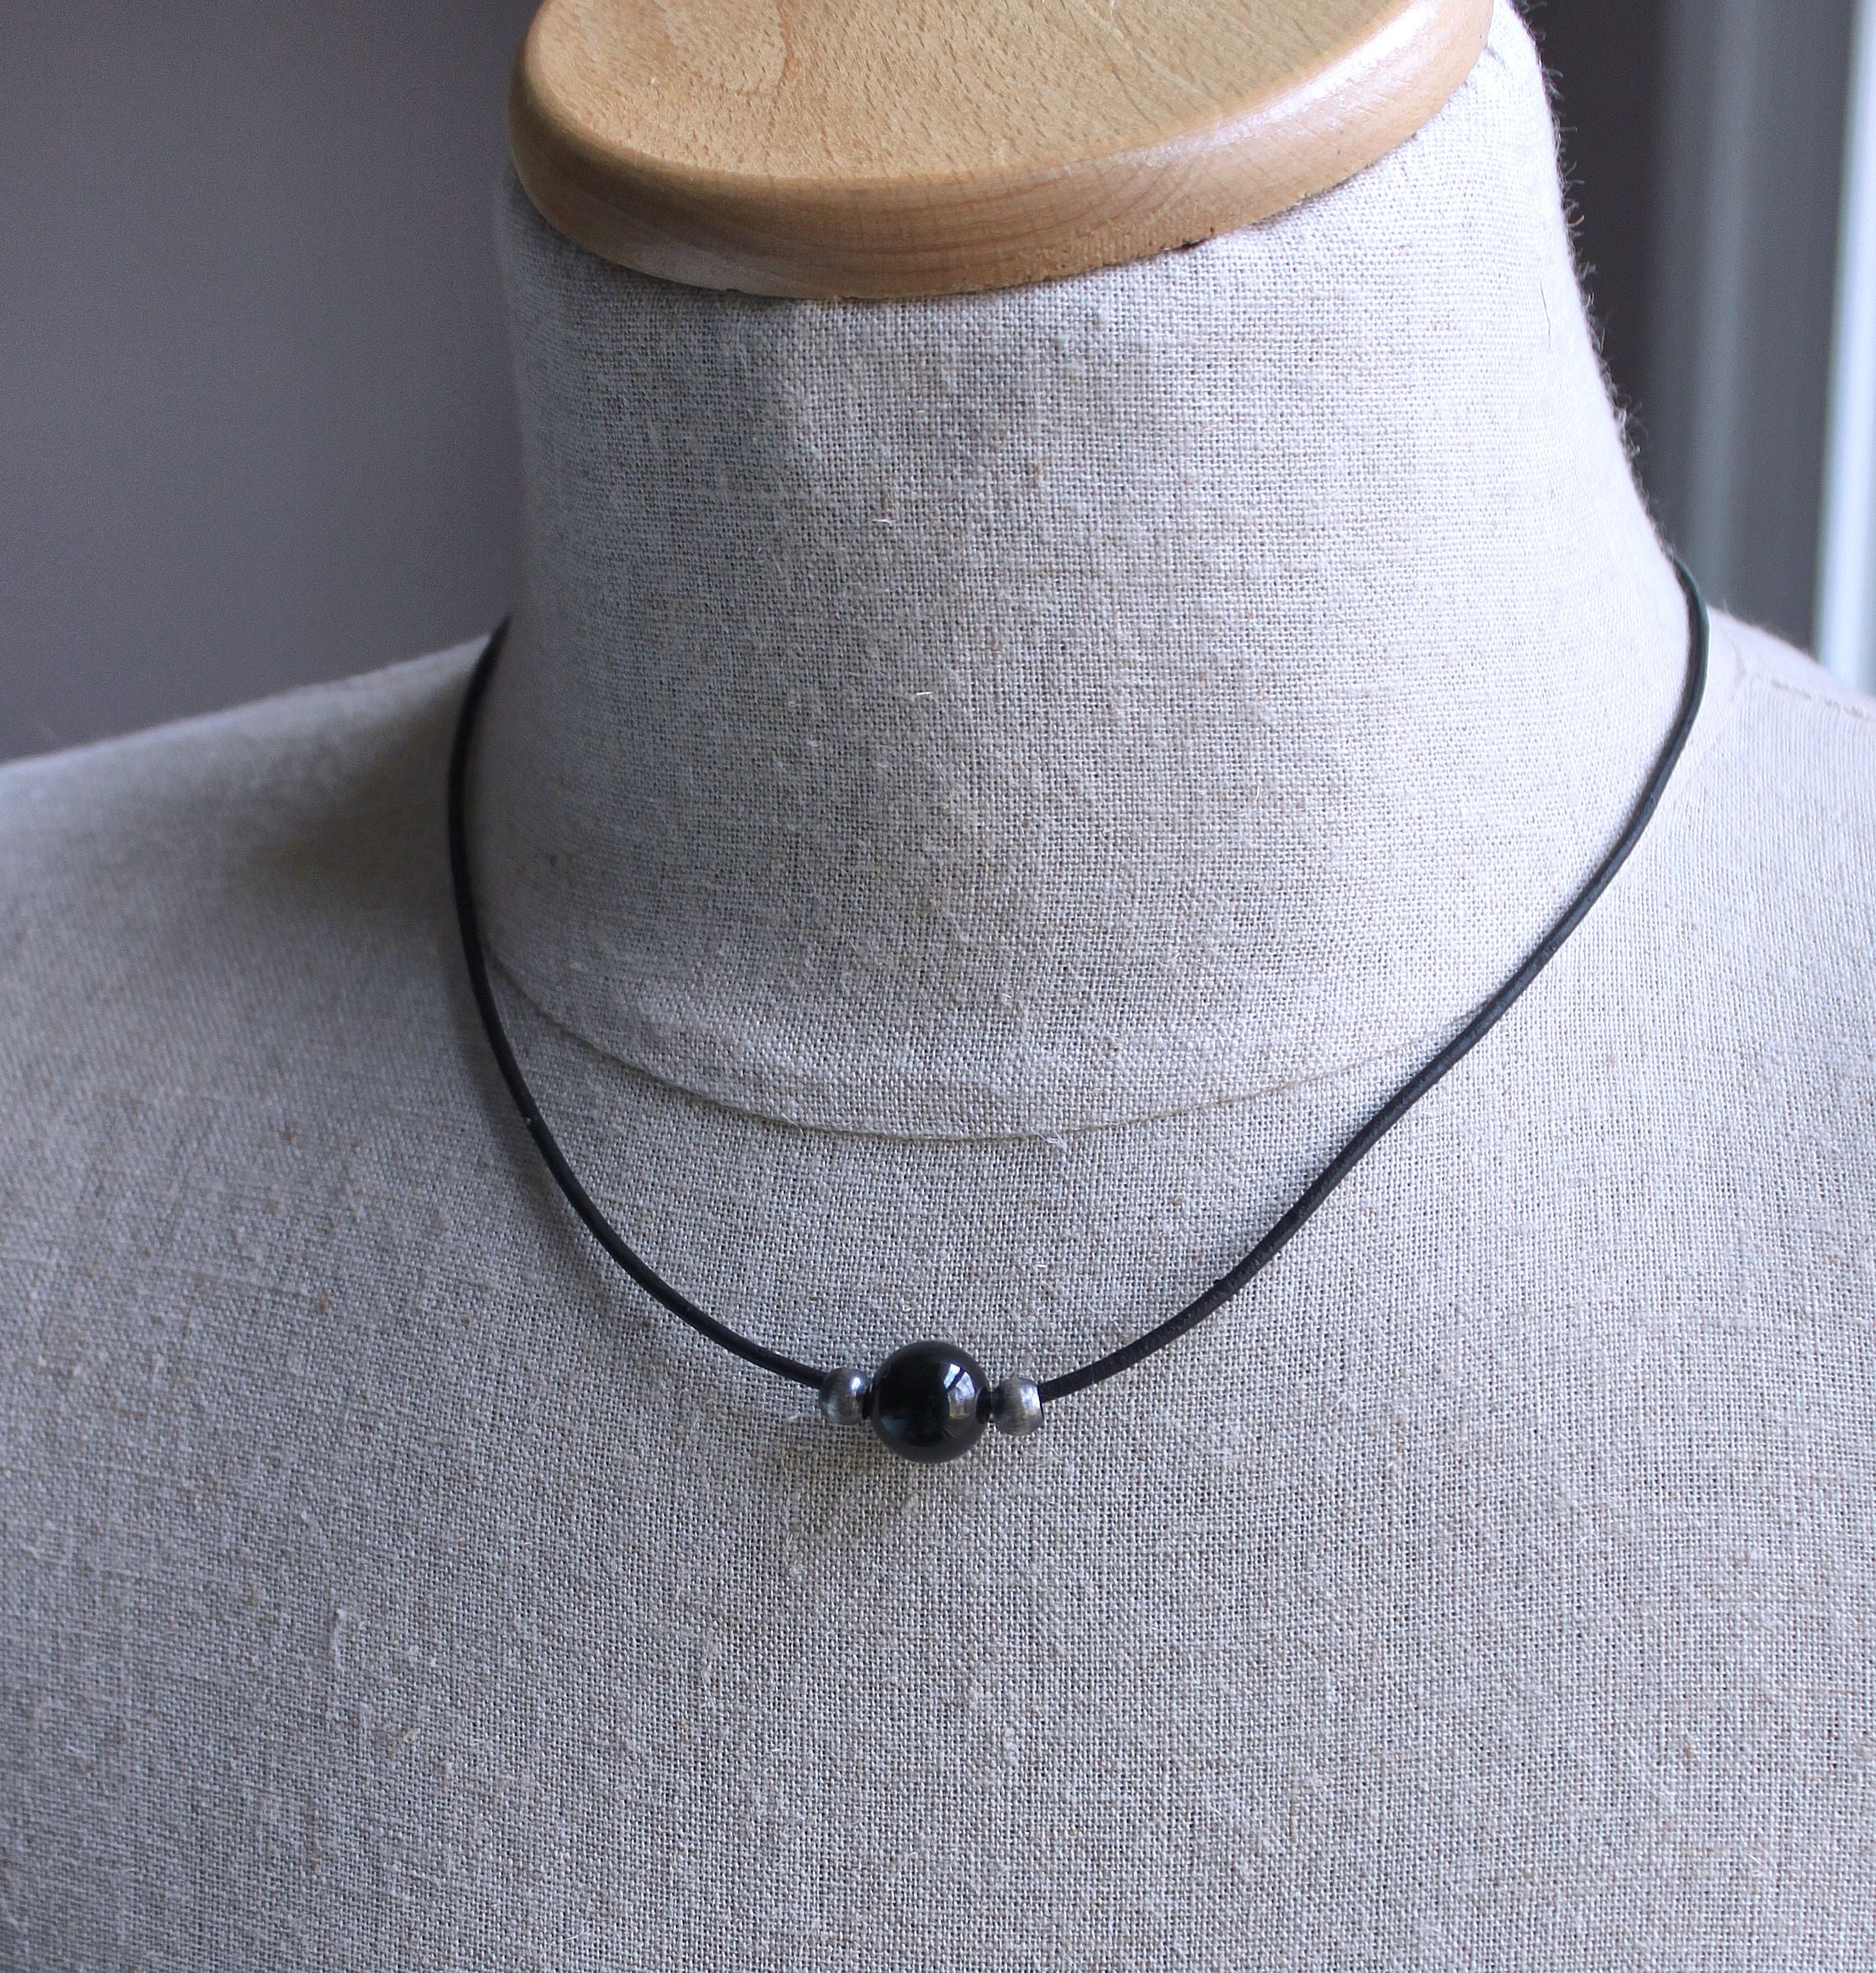 Men's Black Agate Bead Black Leather Cord Necklace 18 Inches